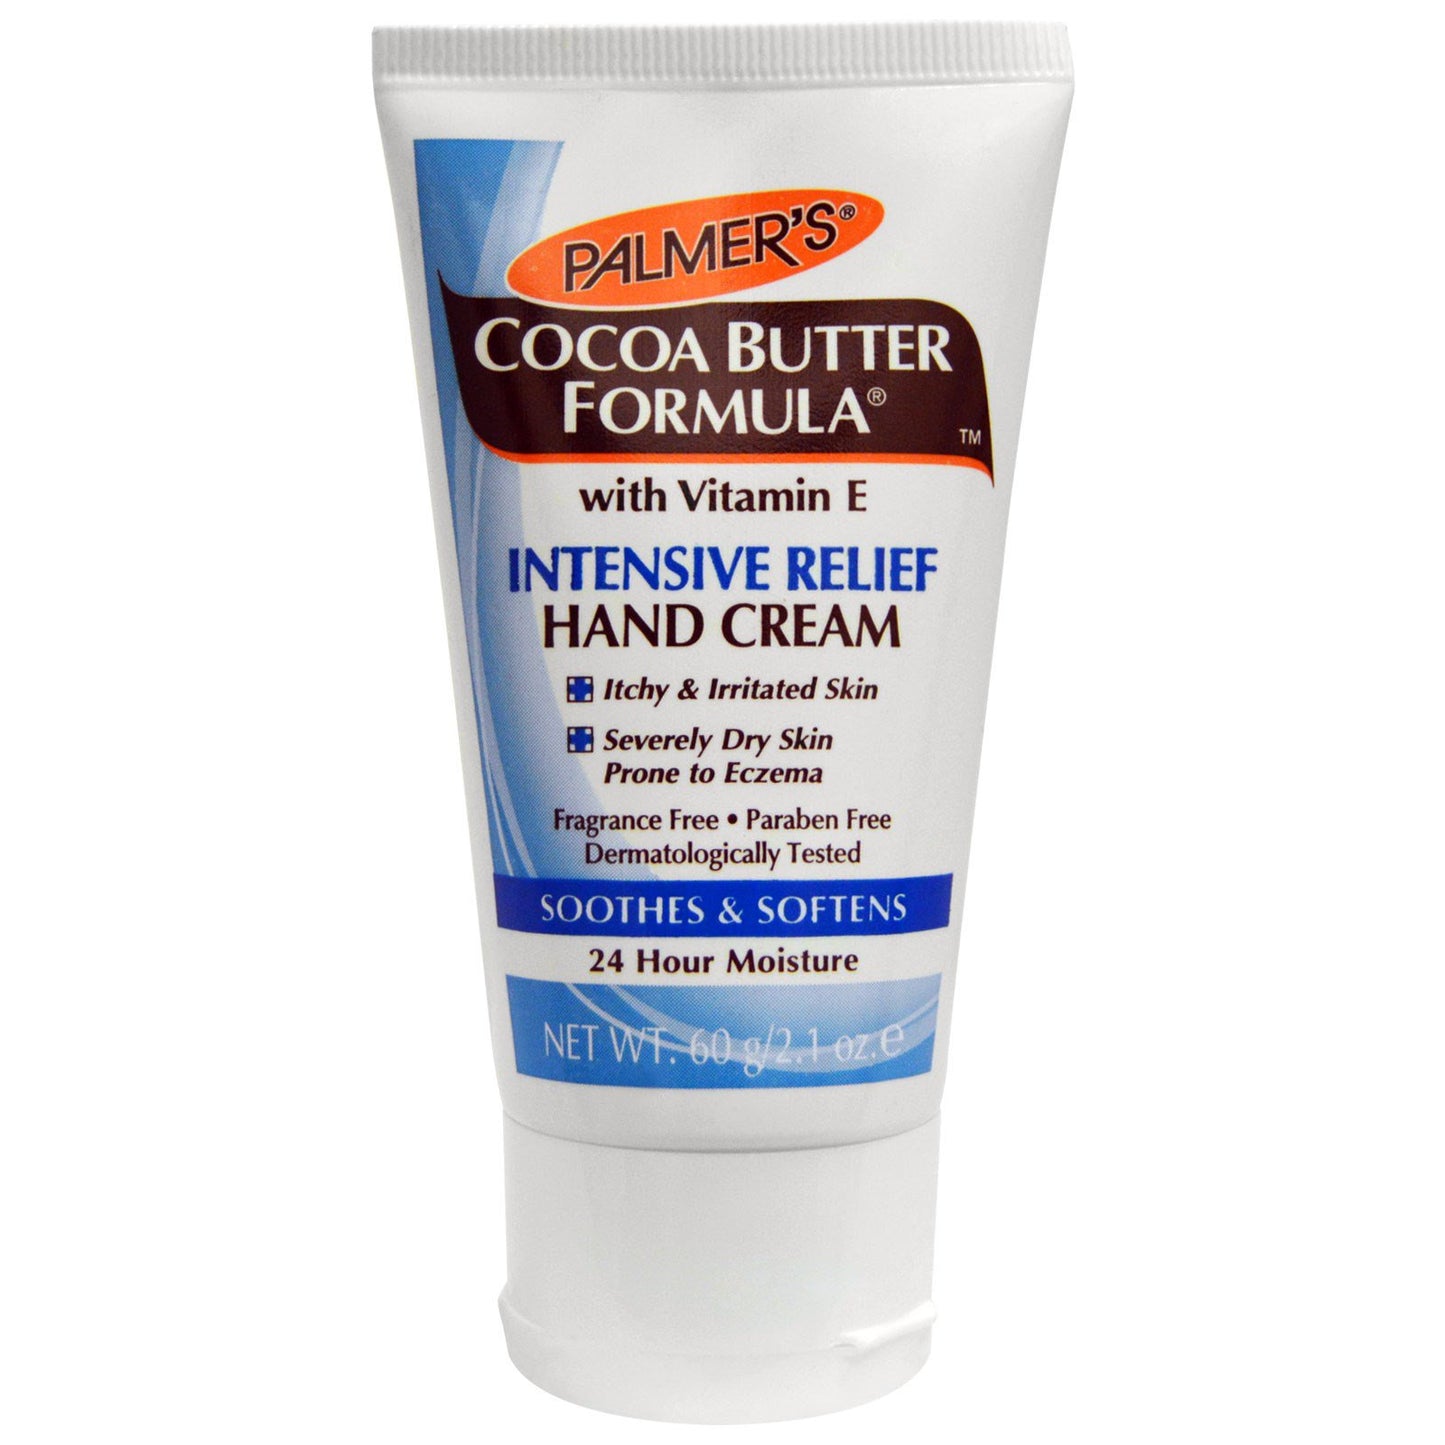 PALMERS Cocoa Butter Intensive Relief Hand Cream 60g - Homeware Discounts